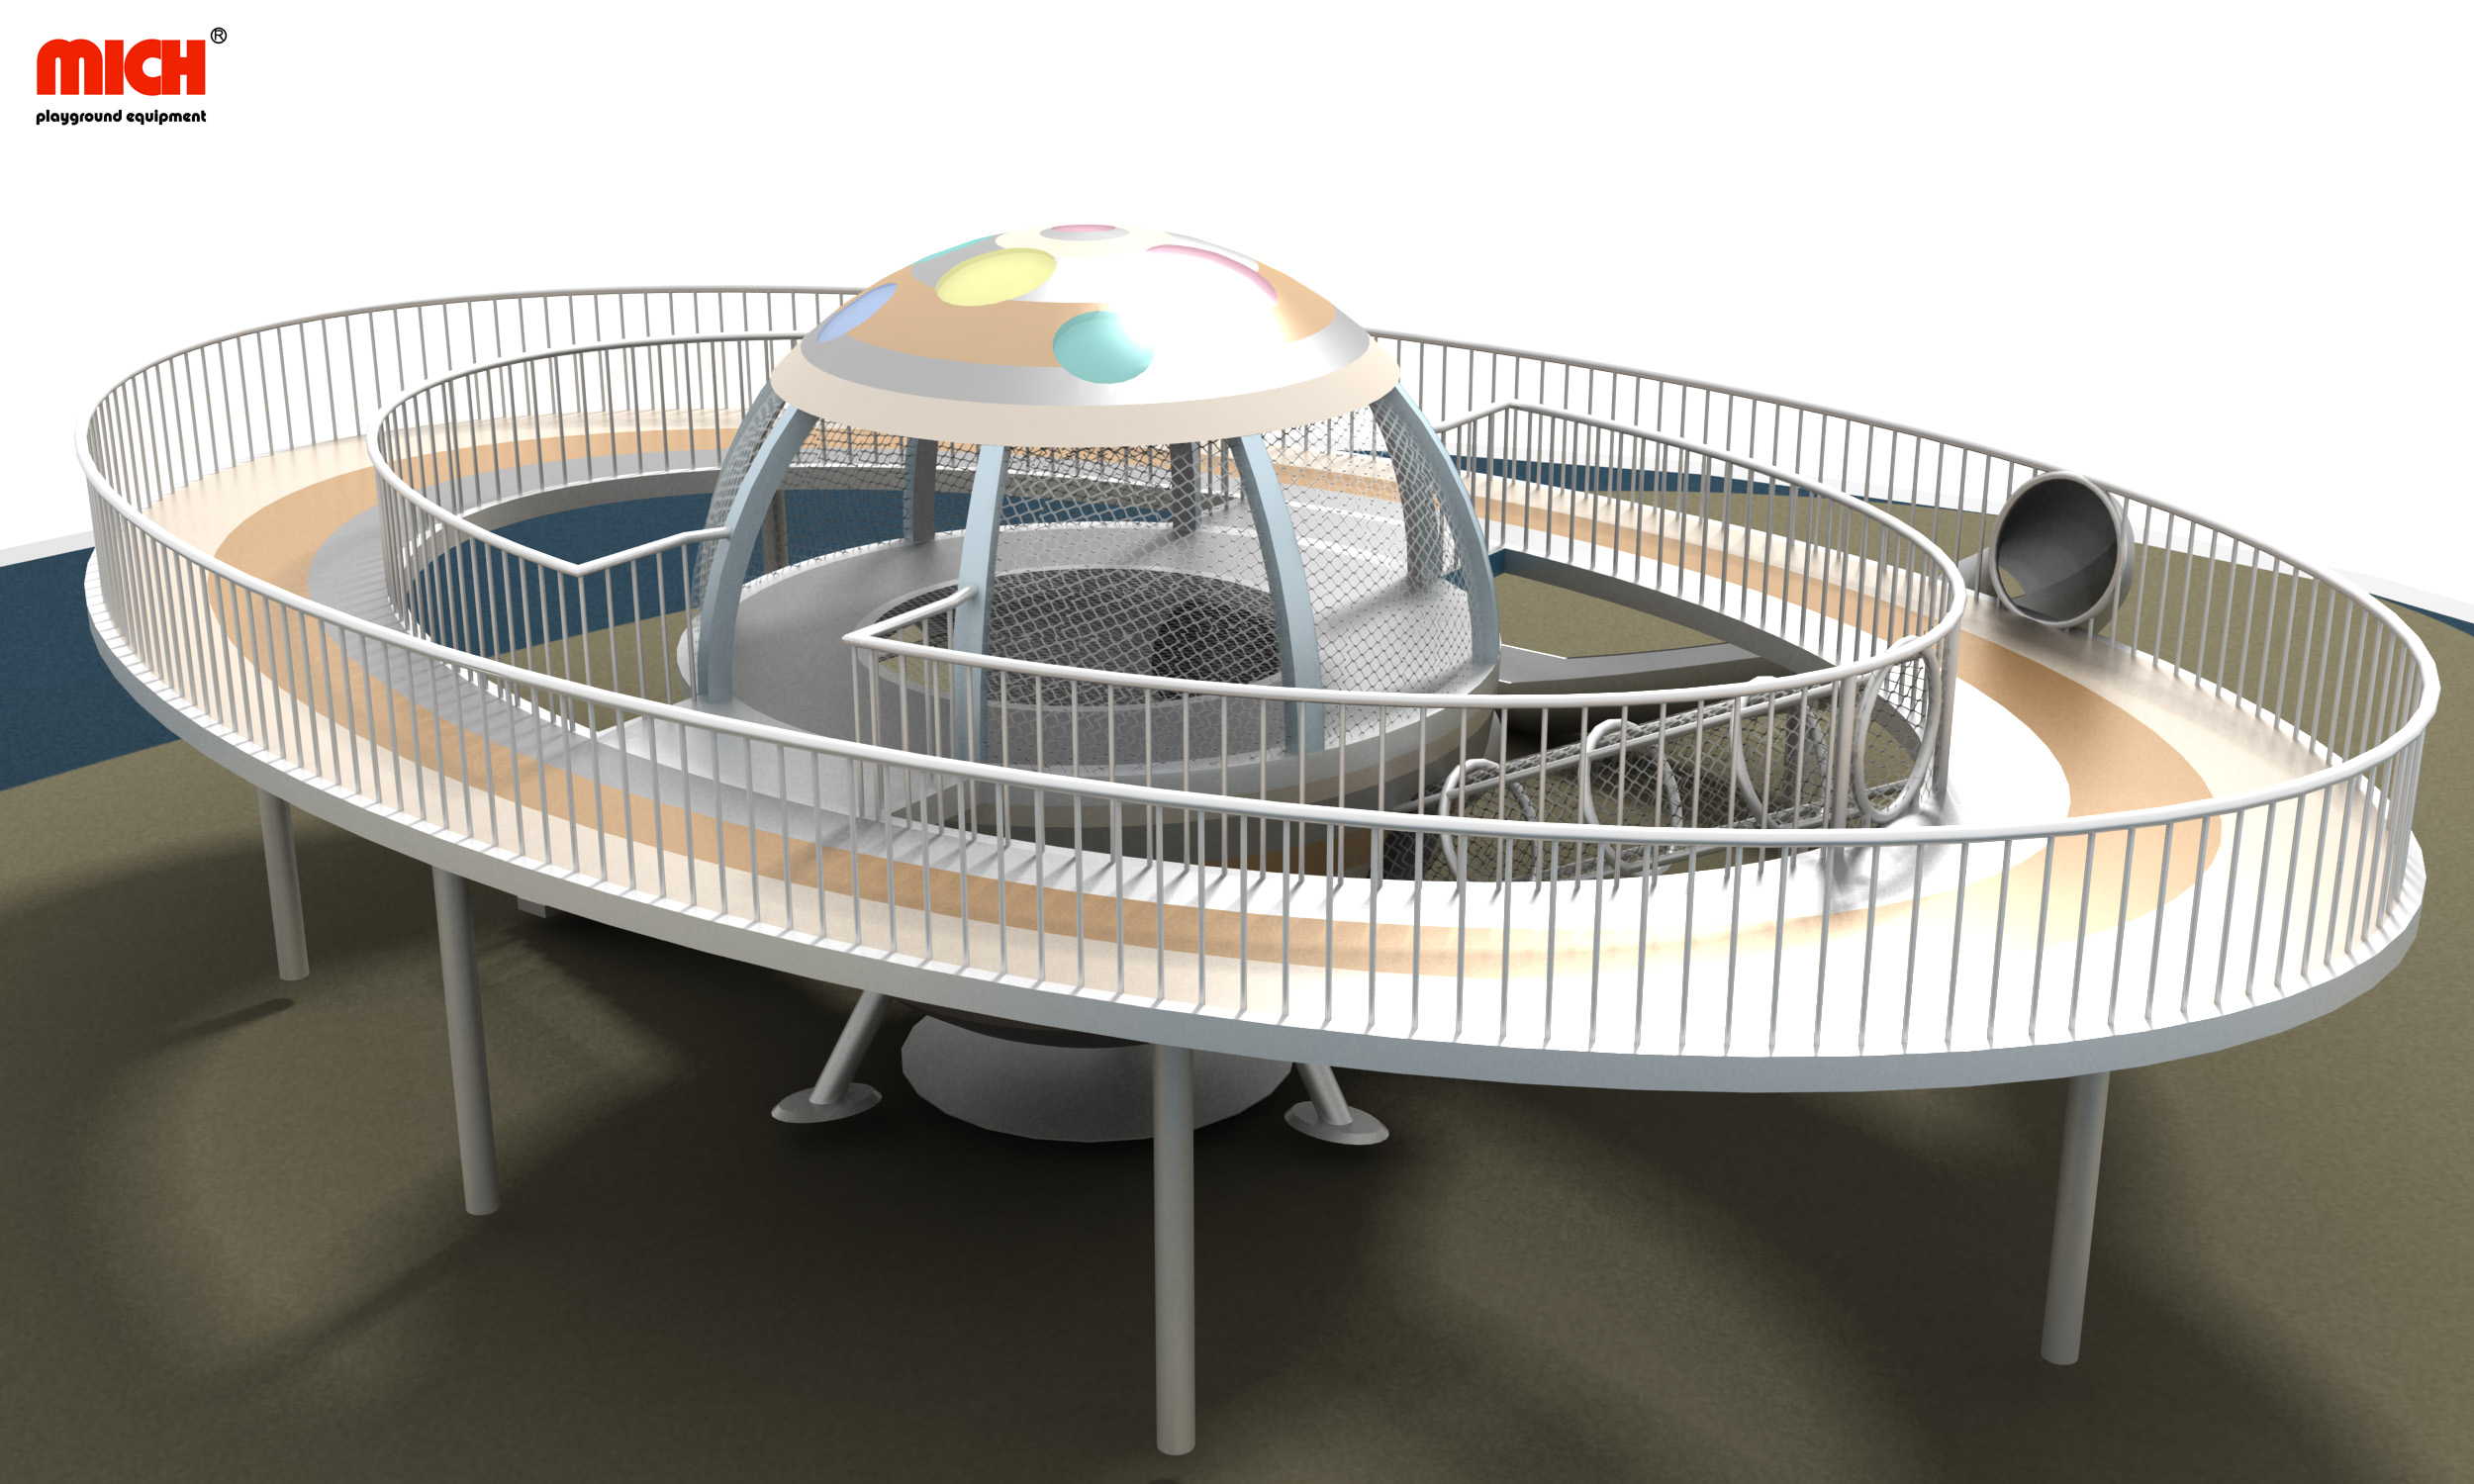 Space Themed Round Outdoor Play Structure